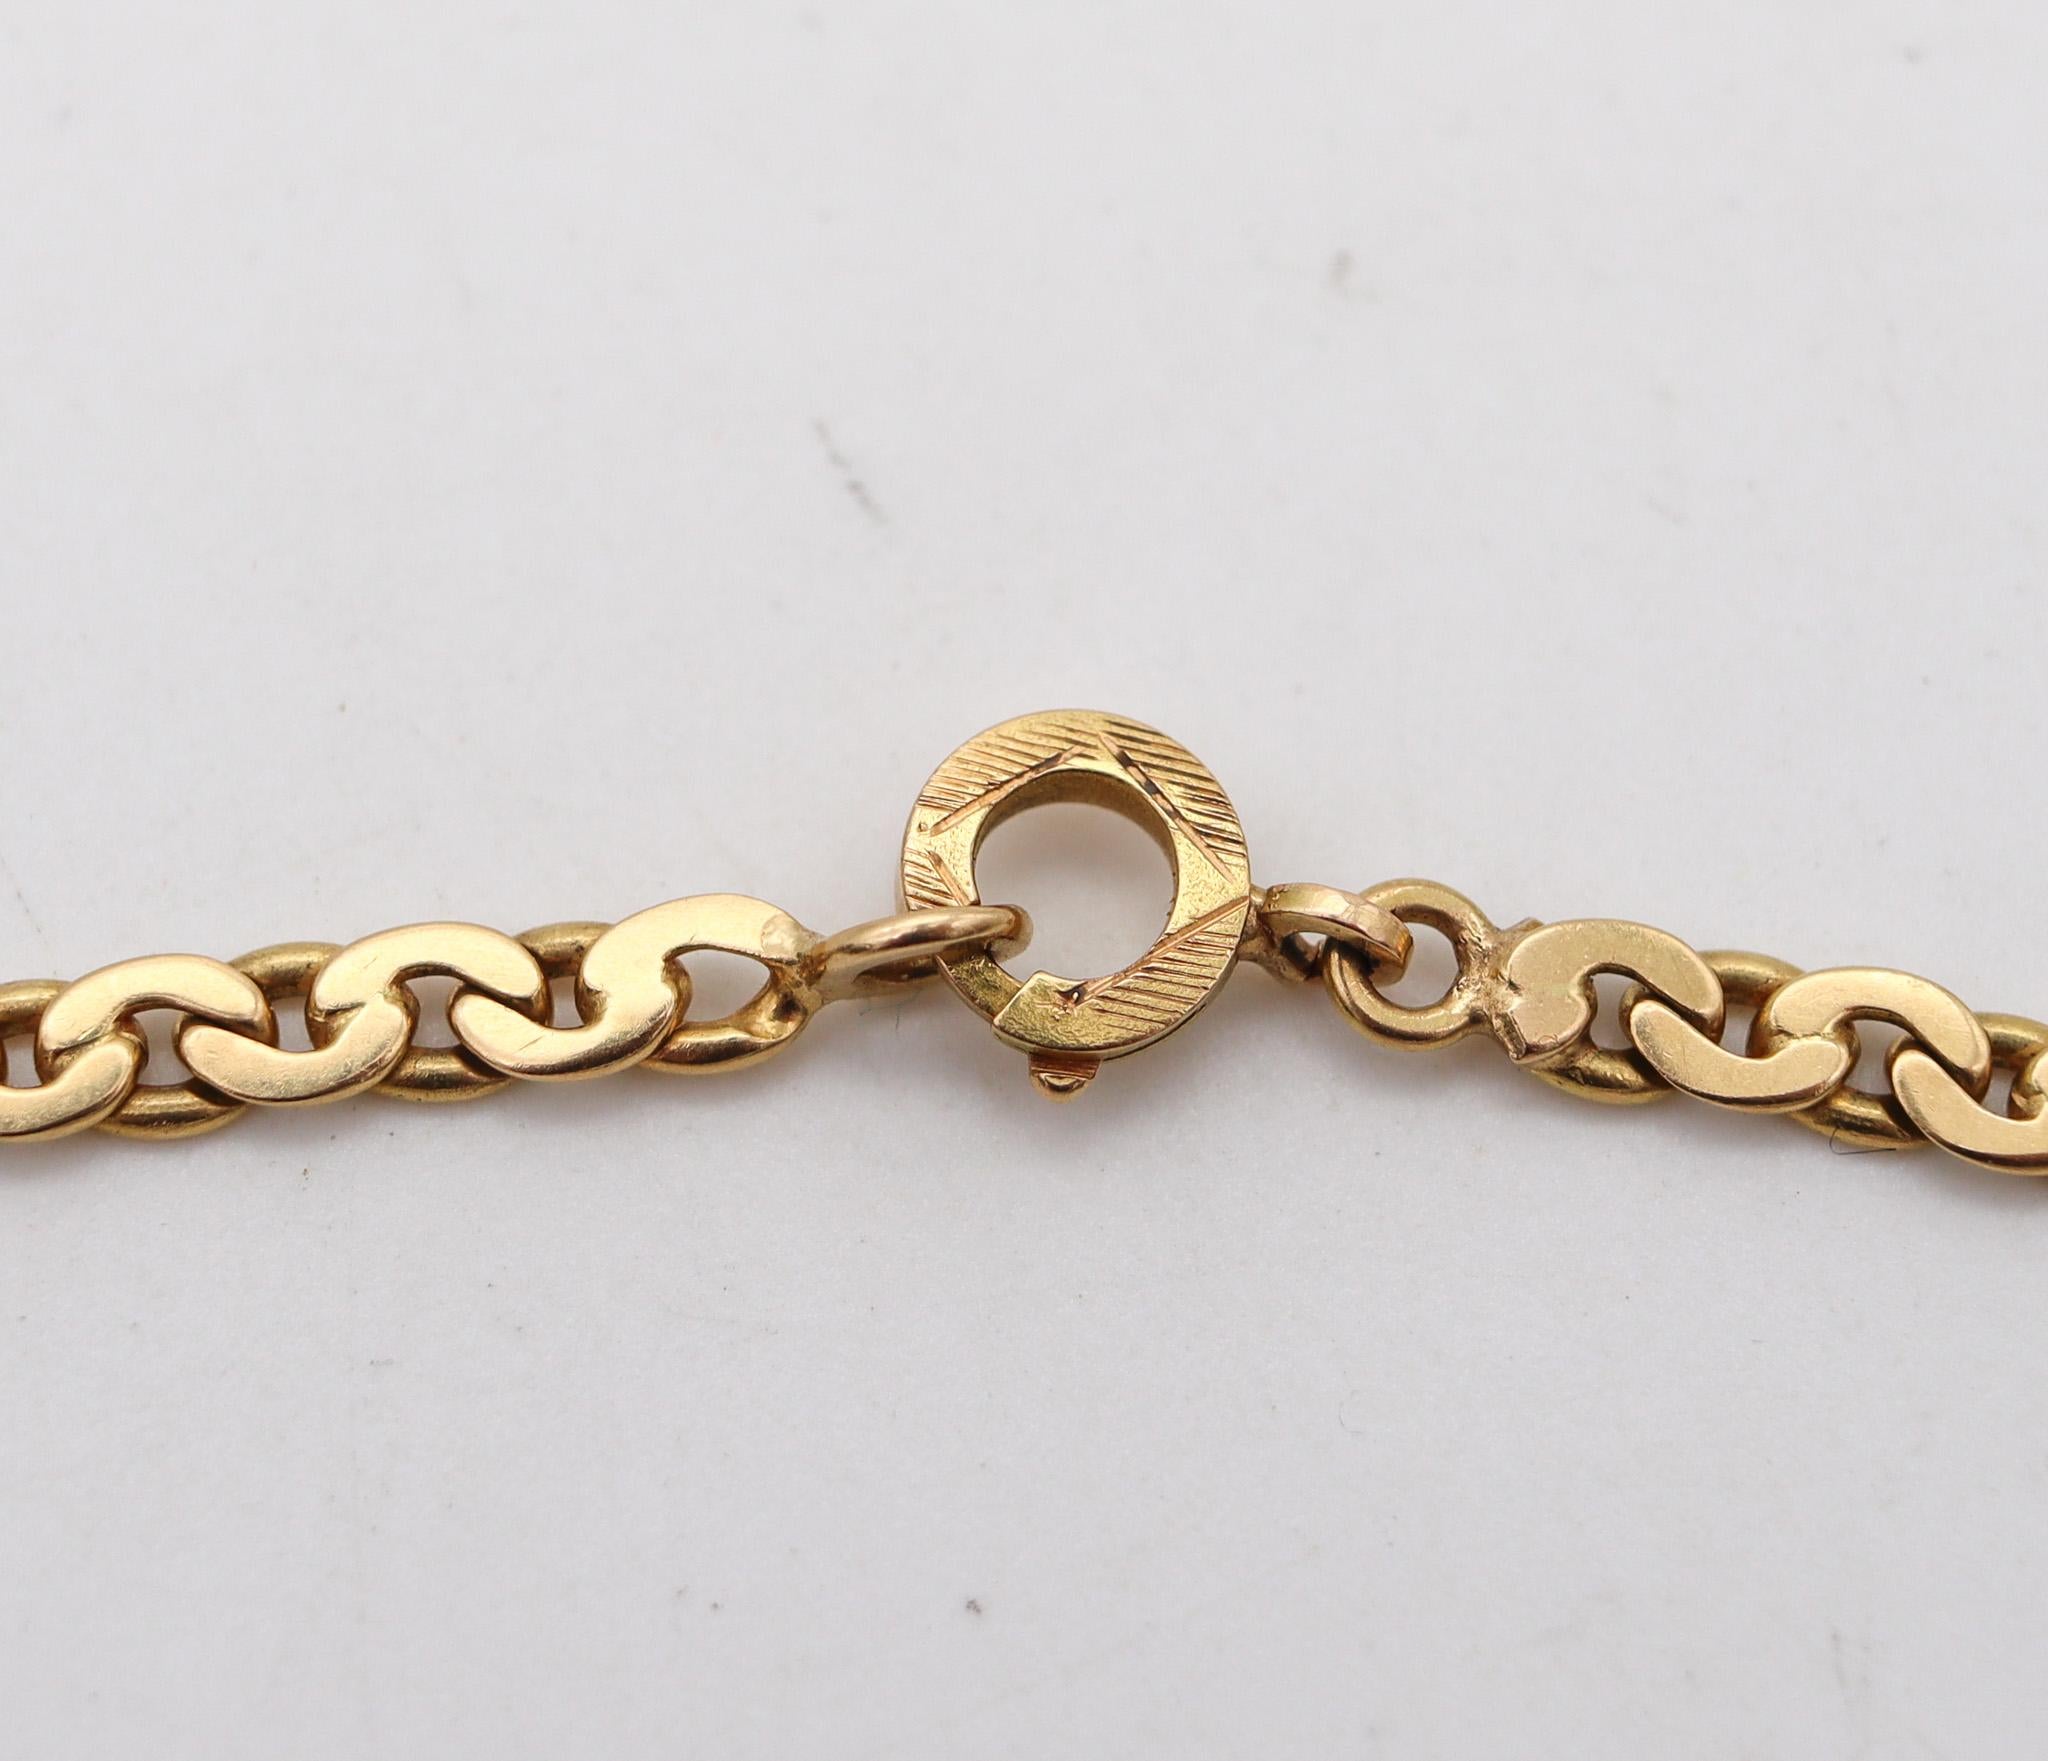 Marchisio Napoleone 1935 Italian Art Deco Long Chain In Solid 18Kt Yellow Gold For Sale 1